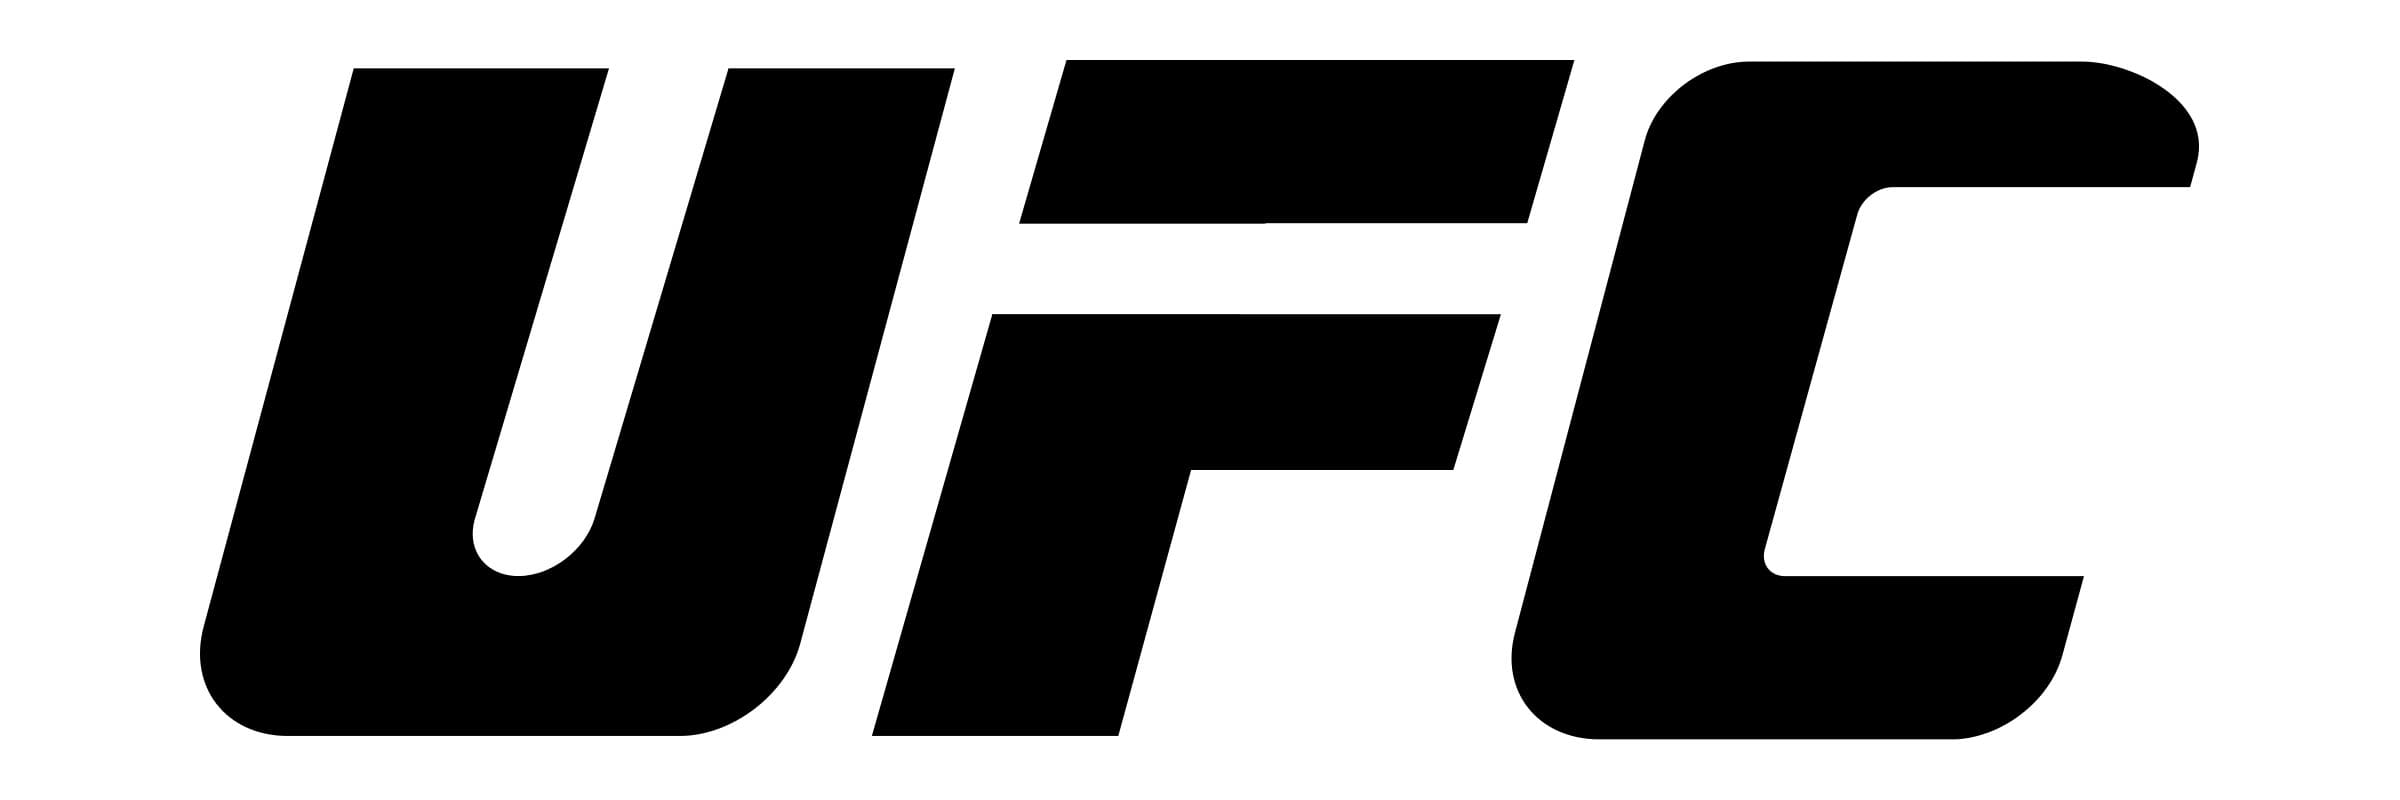 In 2001 the logo of the UFC was simplified to just an inscription in a cust...